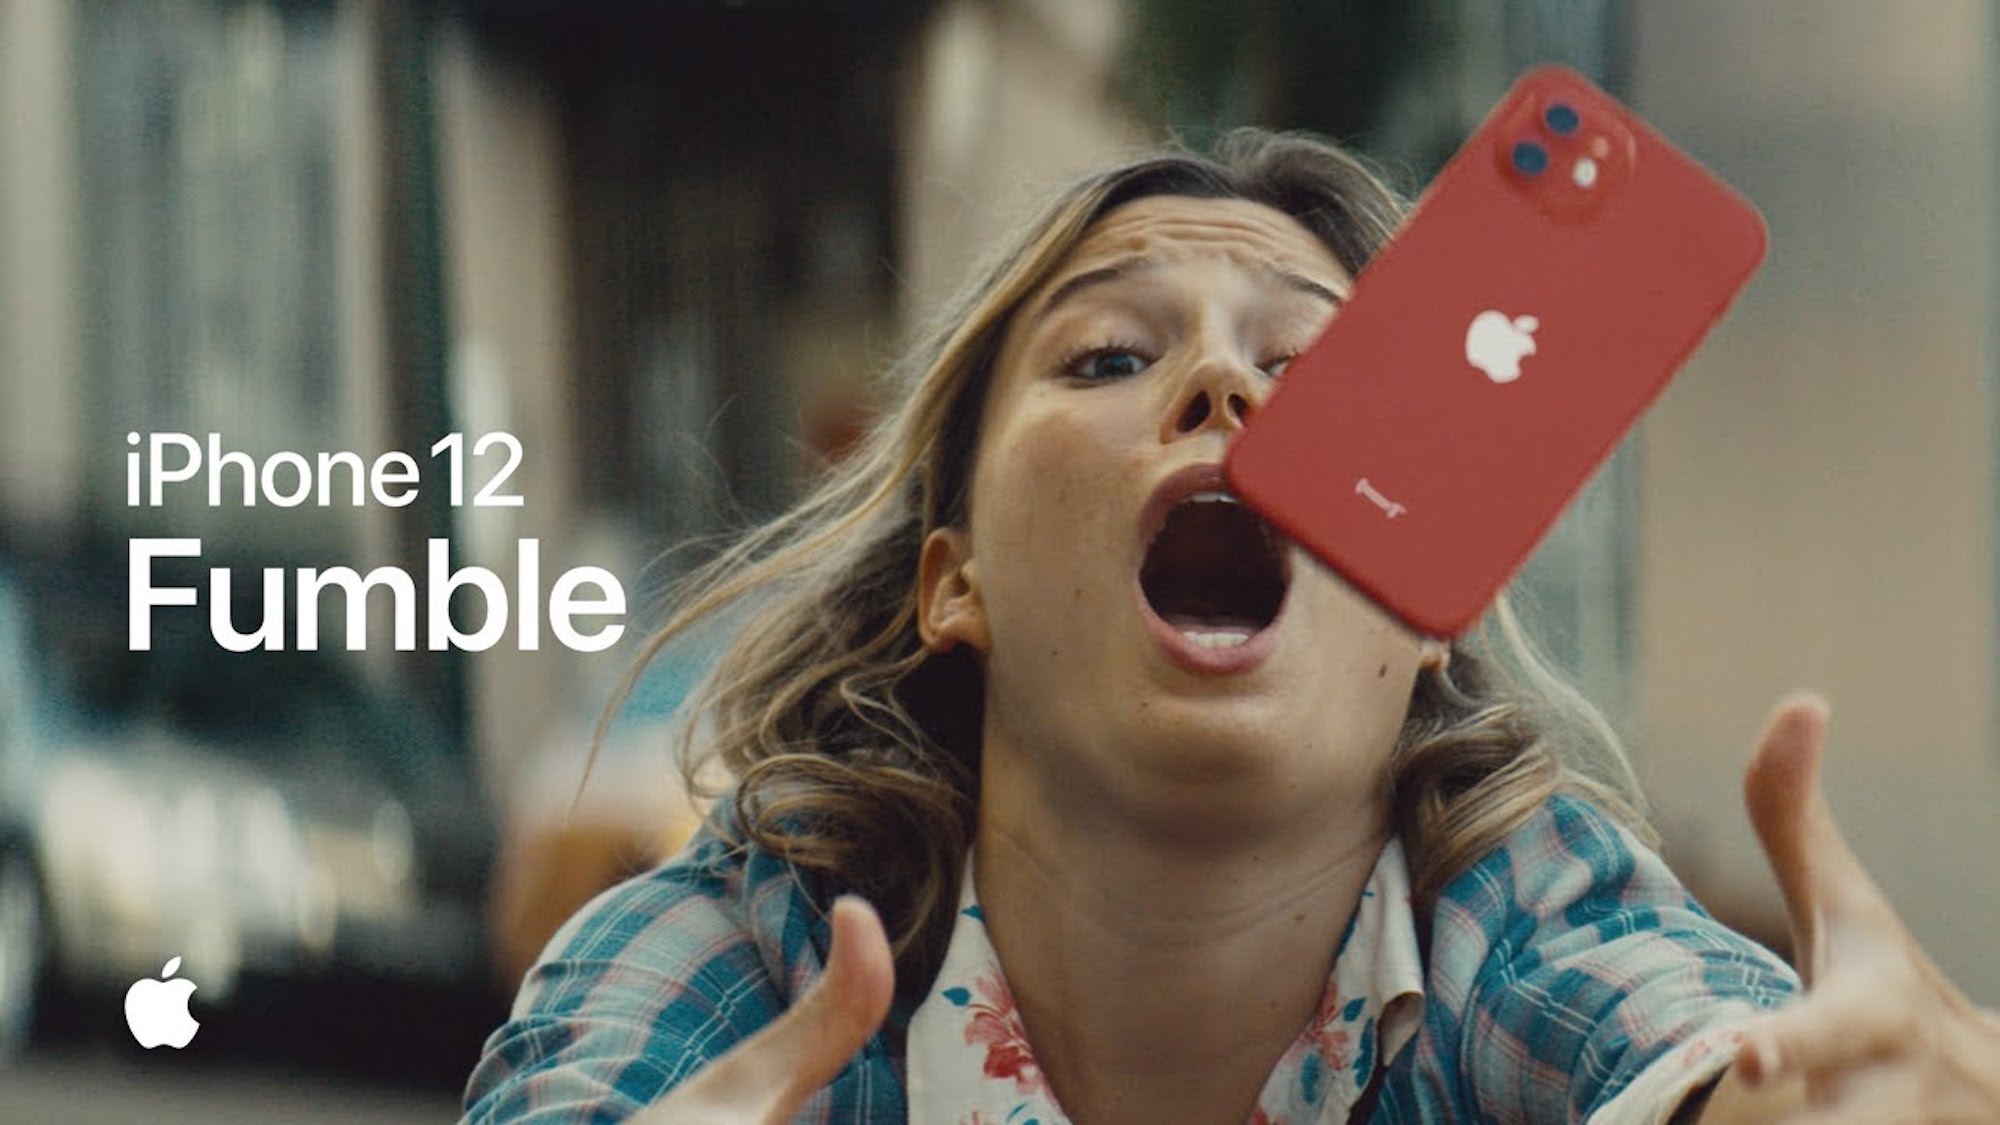 latest-apple-iphone-12-fumble-ad-with-a-tabla-background-score-goes-viral